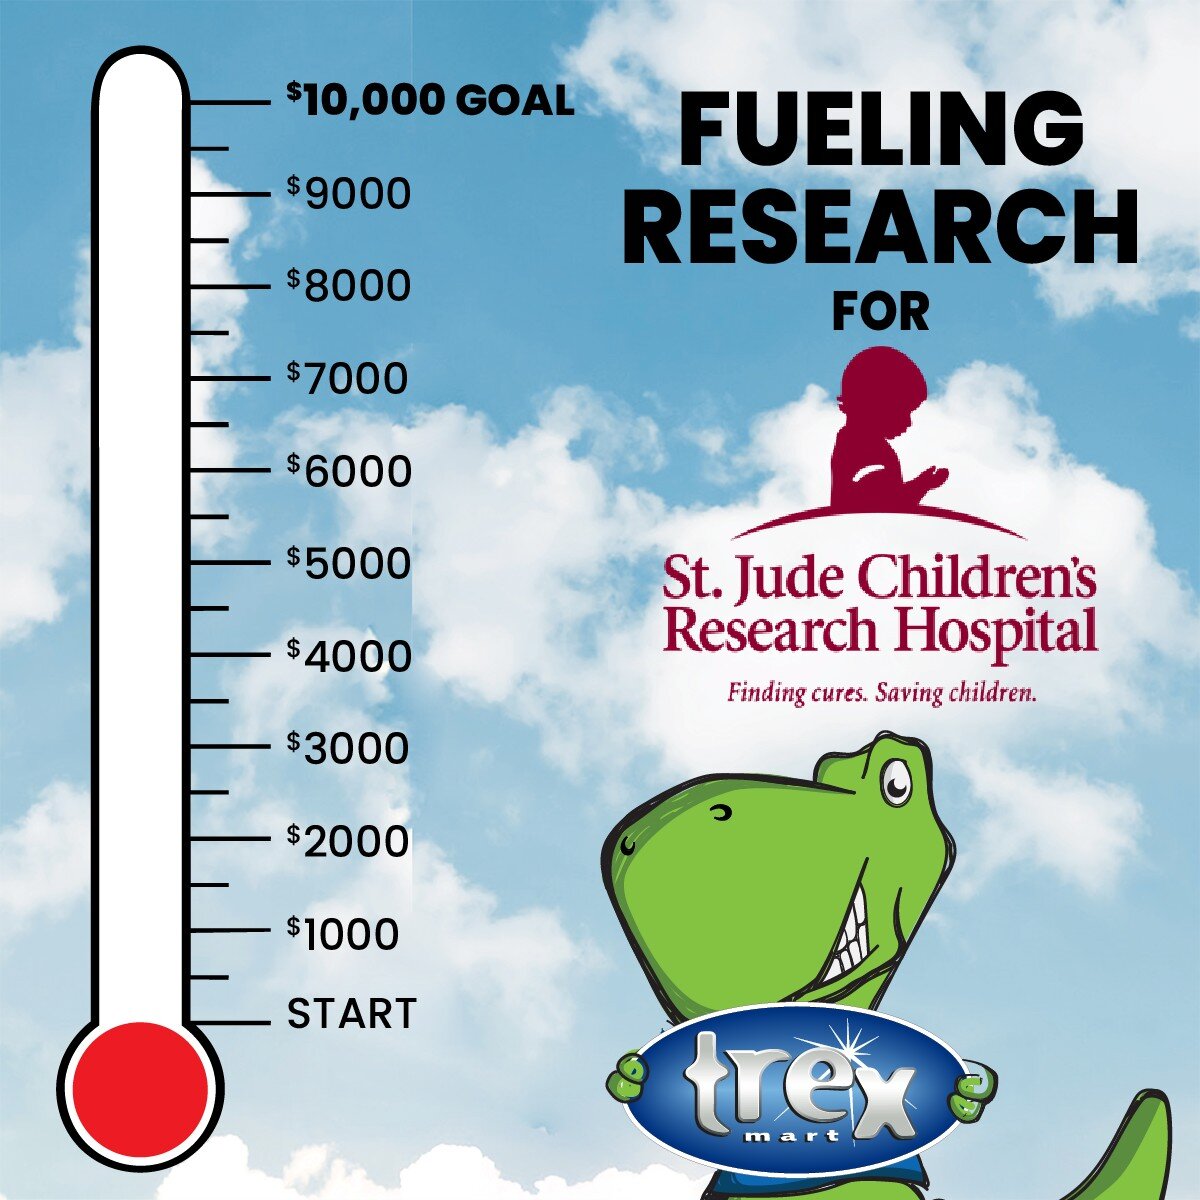 We're almost through the first week! We're excited to see how much we've raised for St Jude Children's Research Hospital! Watch for our weekly updates!

*Edited - Results to come!*